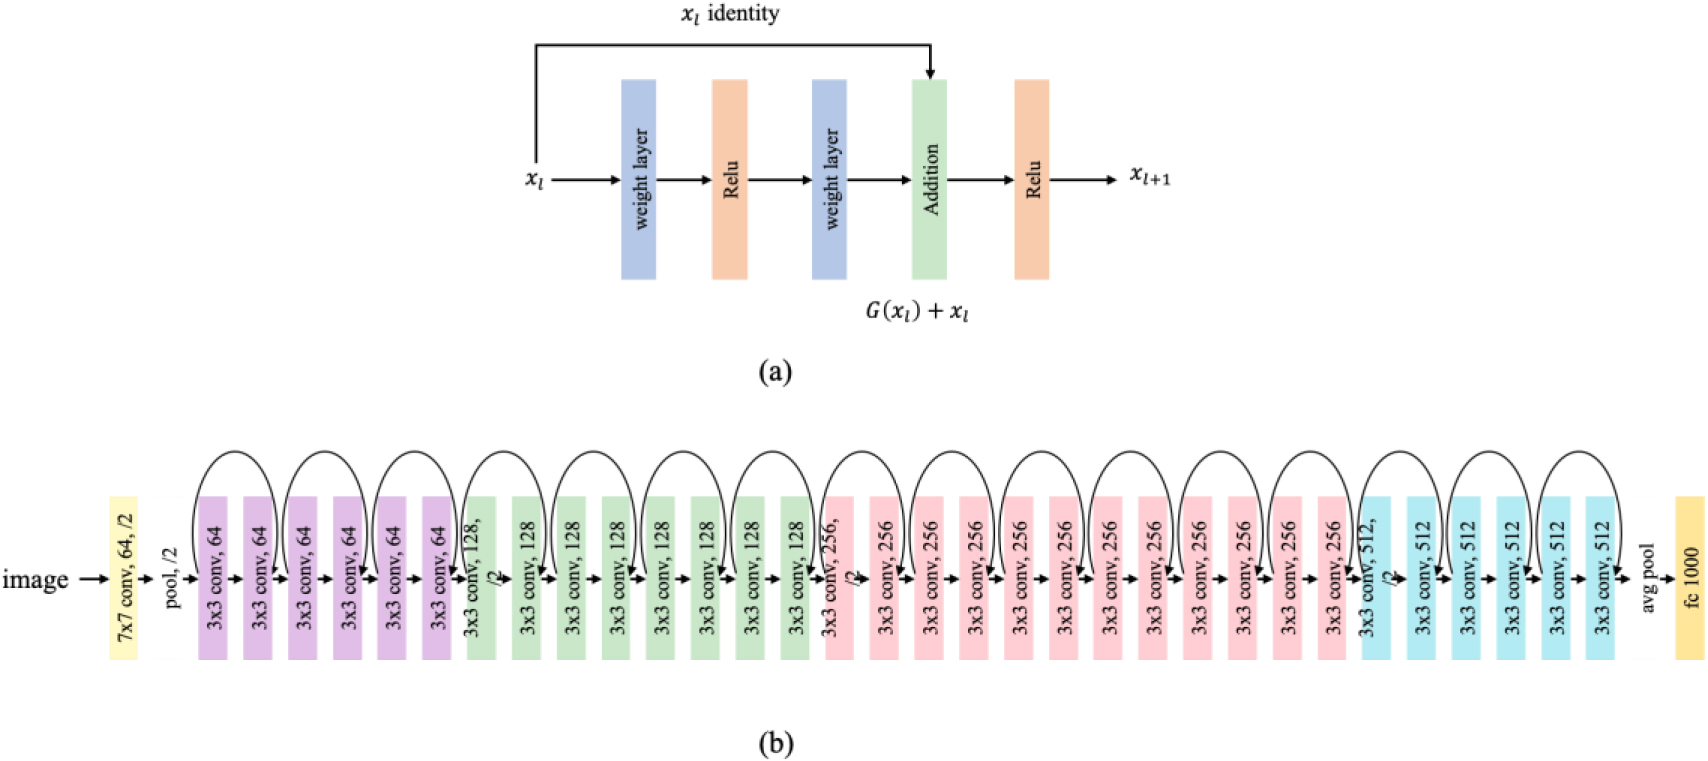 (a) Residual units. The core of residual units is to introduce a skip connection in each layer of the network, passing the output of the previous layer directly to the next and adding it. This helps retain information and alleviate the gradient disappearance problem. (b) The structure of Resnet34. Resnet34 consists of 34 convolutional layers and adds skip connections in the network, enabling information to be transferred more efficiently between layers.